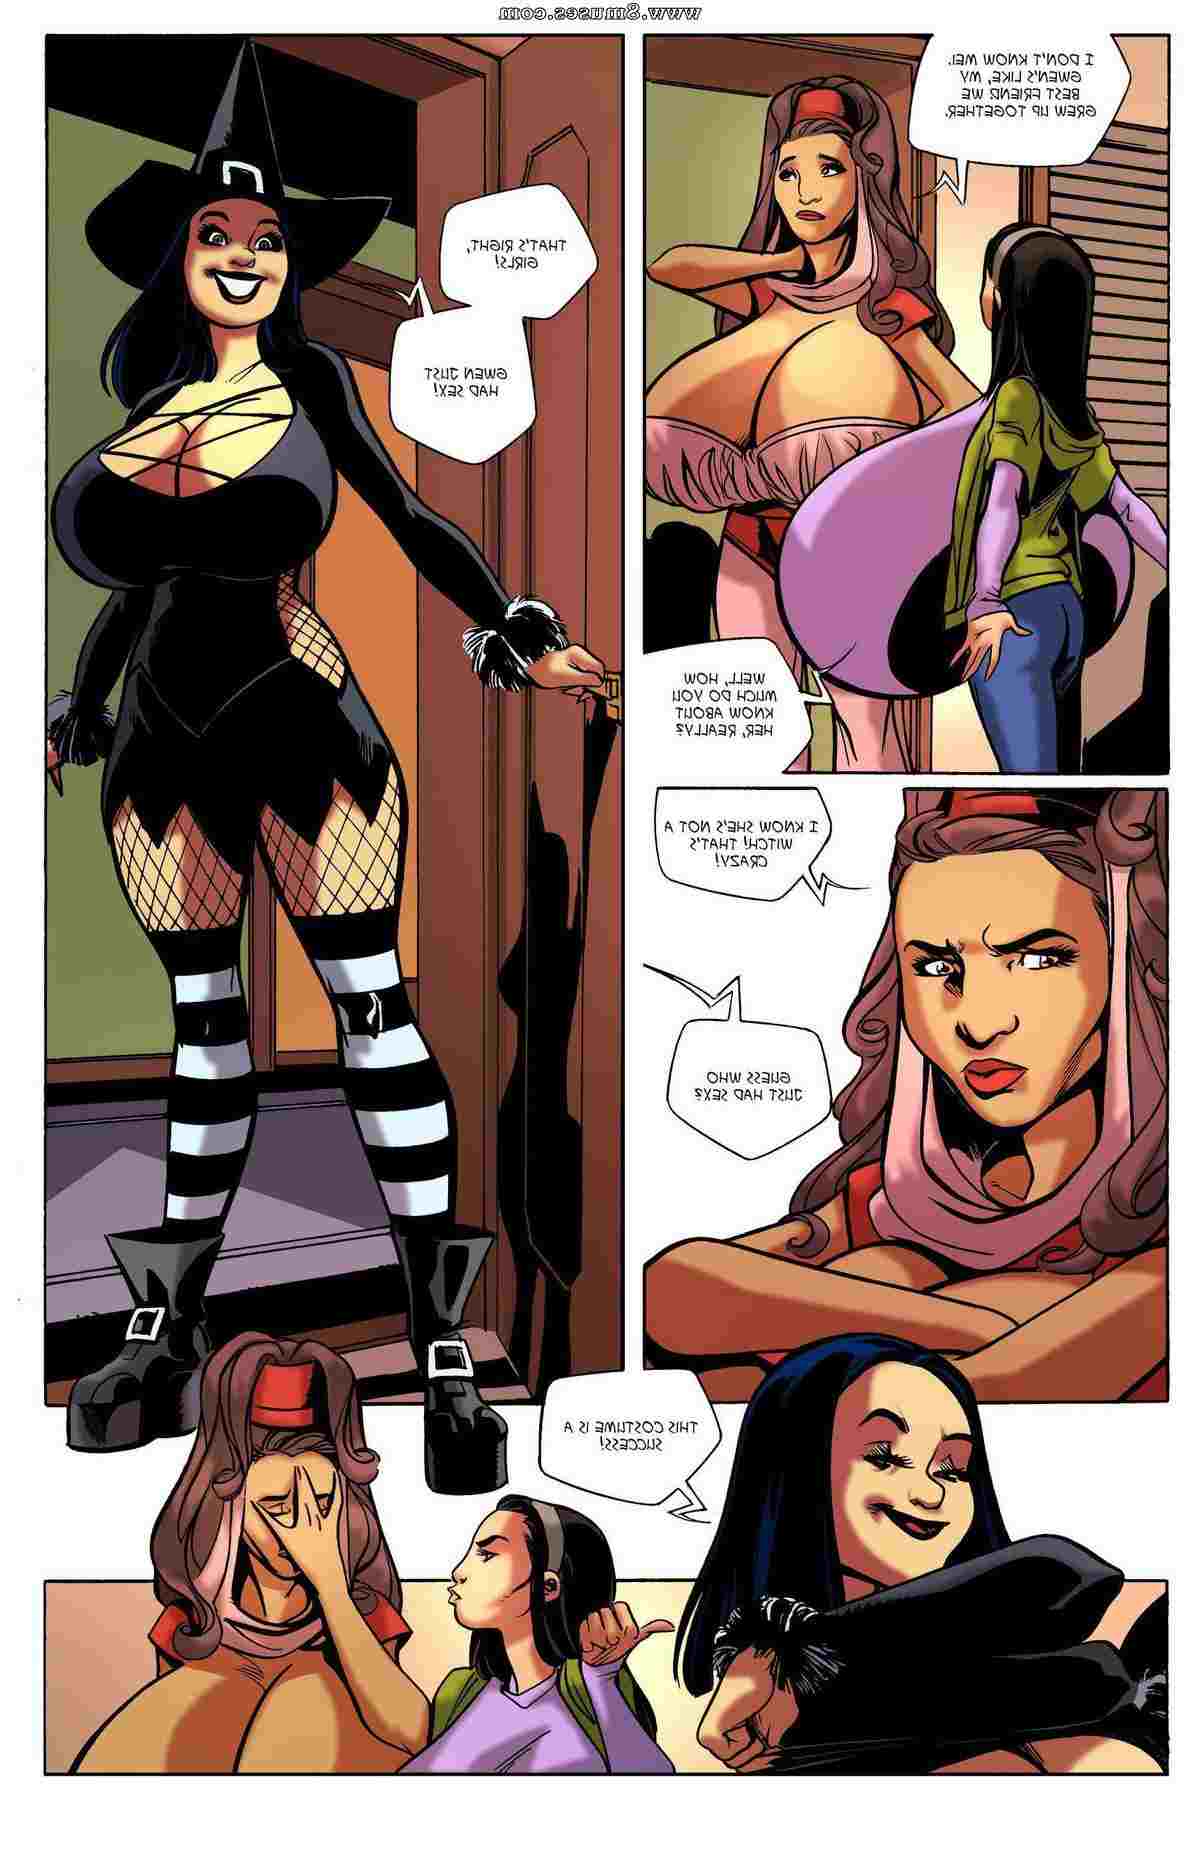 BE-Story-Club-Comics/Welcome-to-Chastity Welcome_to_Chastity__8muses_-_Sex_and_Porn_Comics_107.jpg